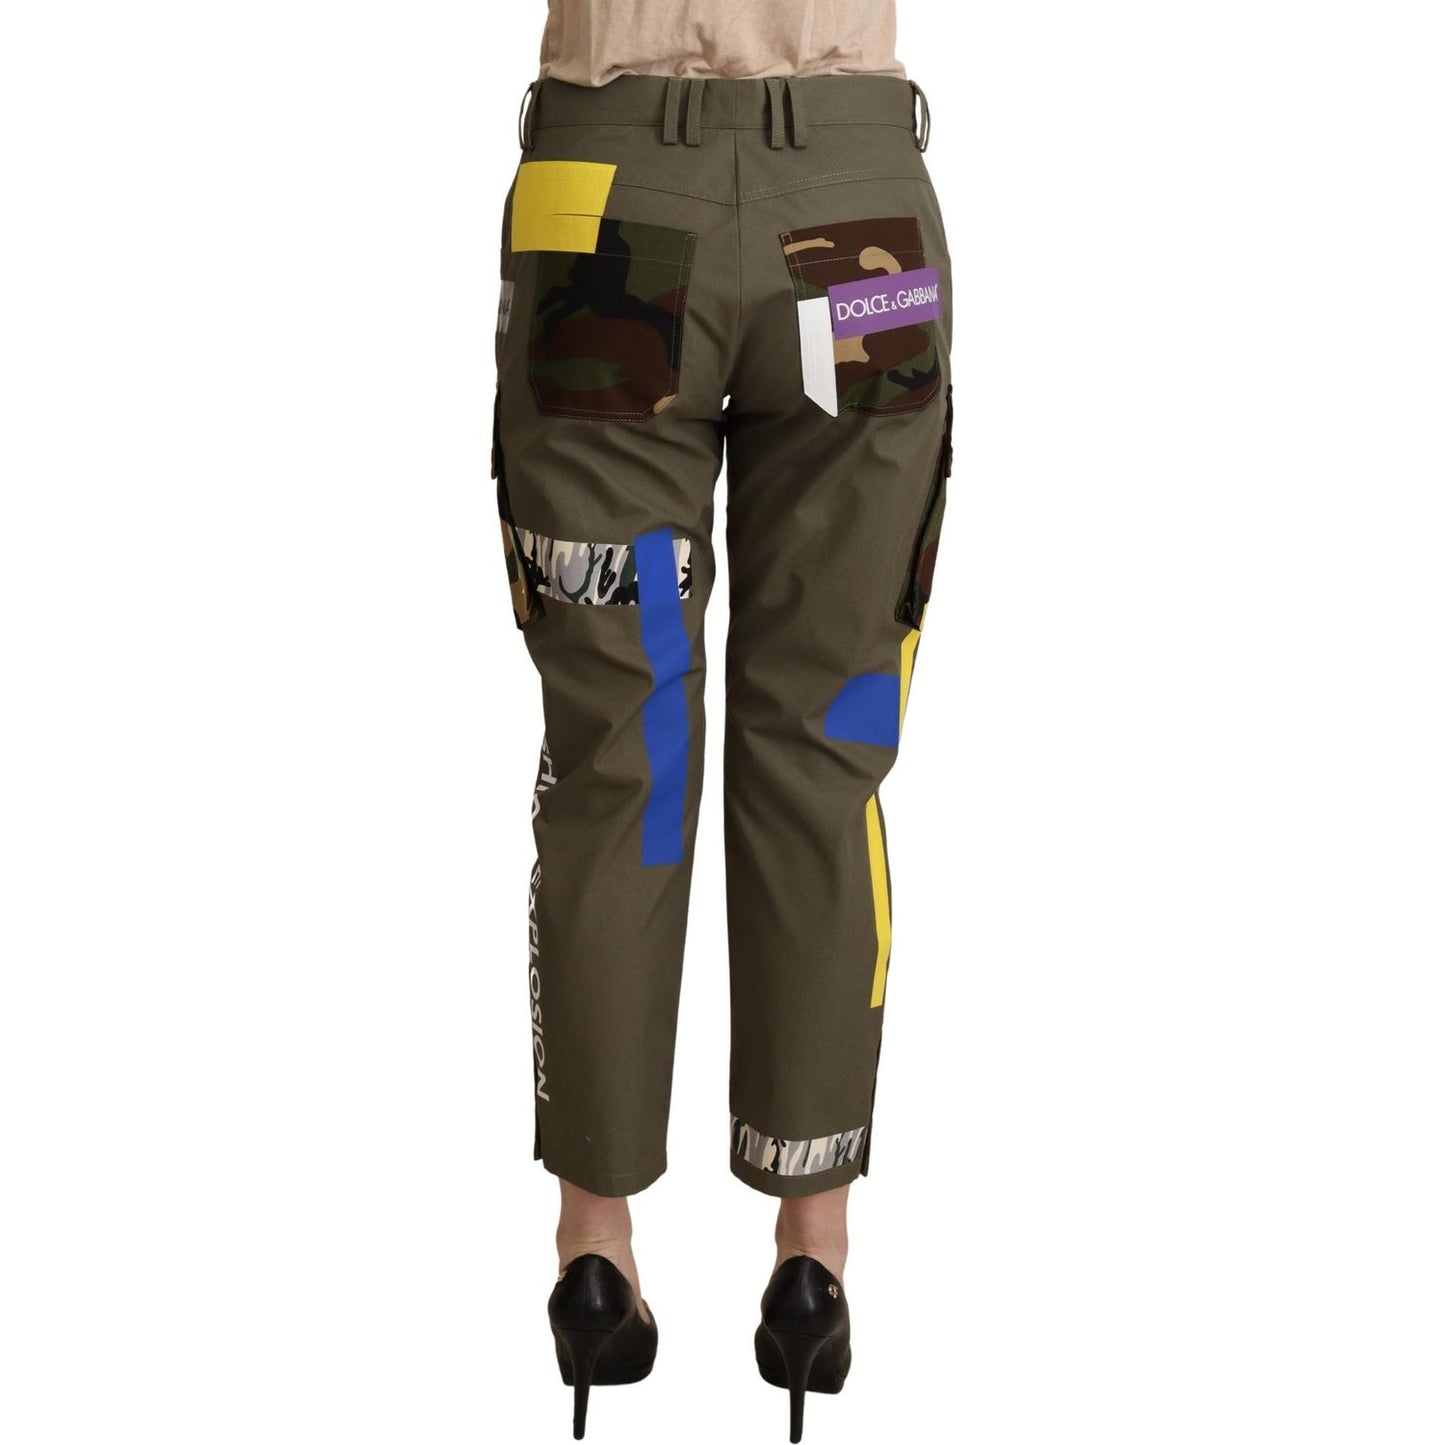 Dolce & Gabbana Chic Multicolor Patched Cargo Pants Jeans & Pants green-military-cargo-trouser-cotton-pants